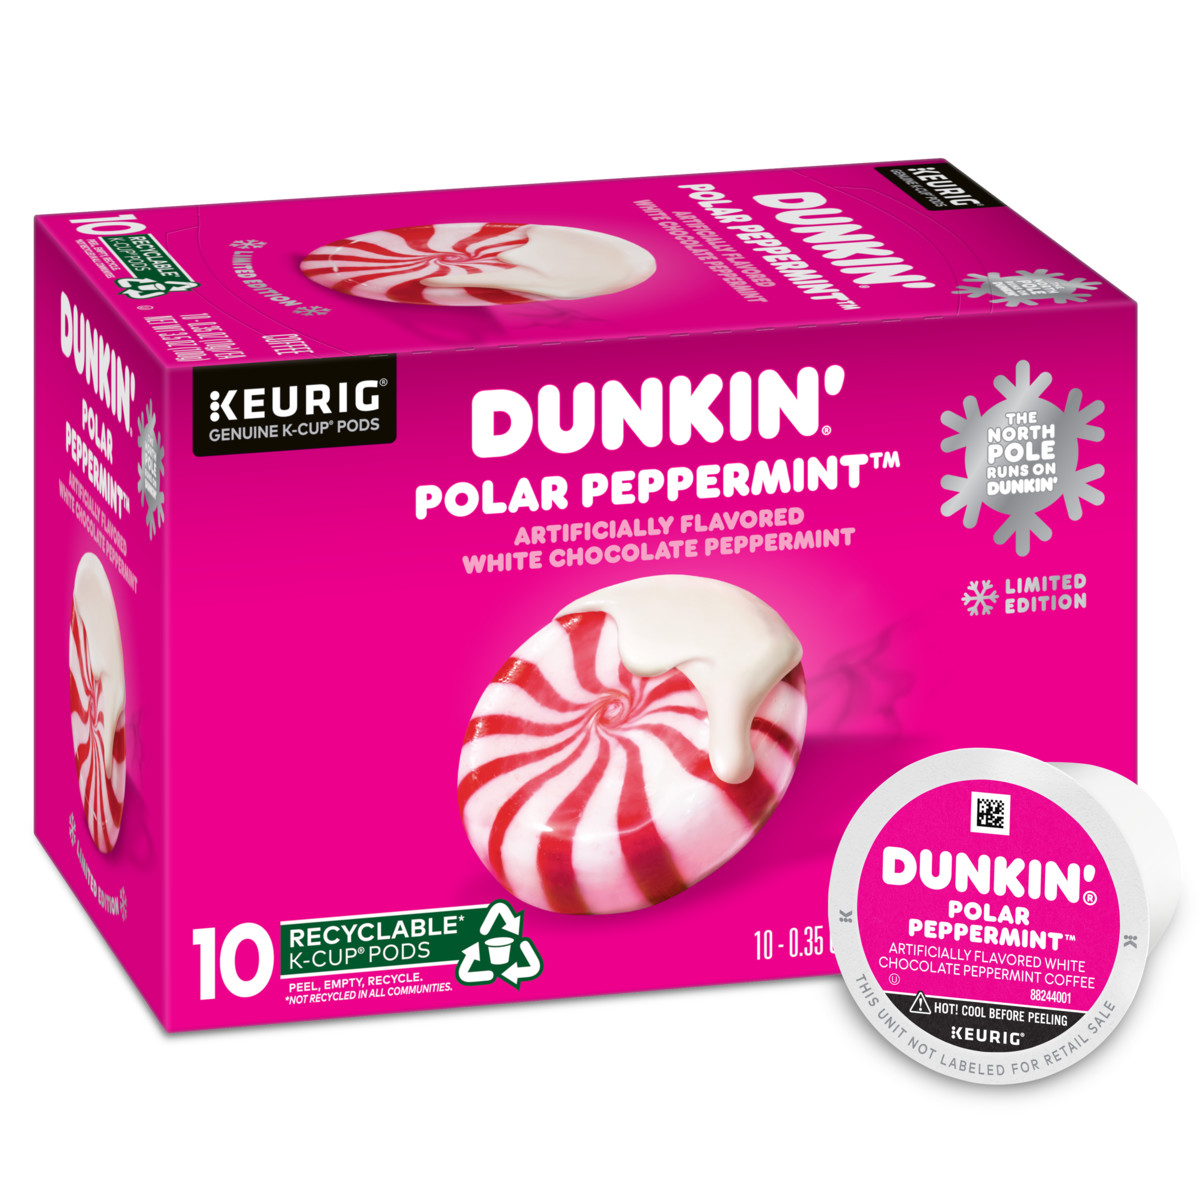 Dunkin'® Polar Peppermint™ Artificially Flavored White Chocolate Peppermint coffee K-Cup® pods in a pink box with an image of a red and white peppermint drizzled with white chocolate on it with a K-Cup® pod on its side in the foreground